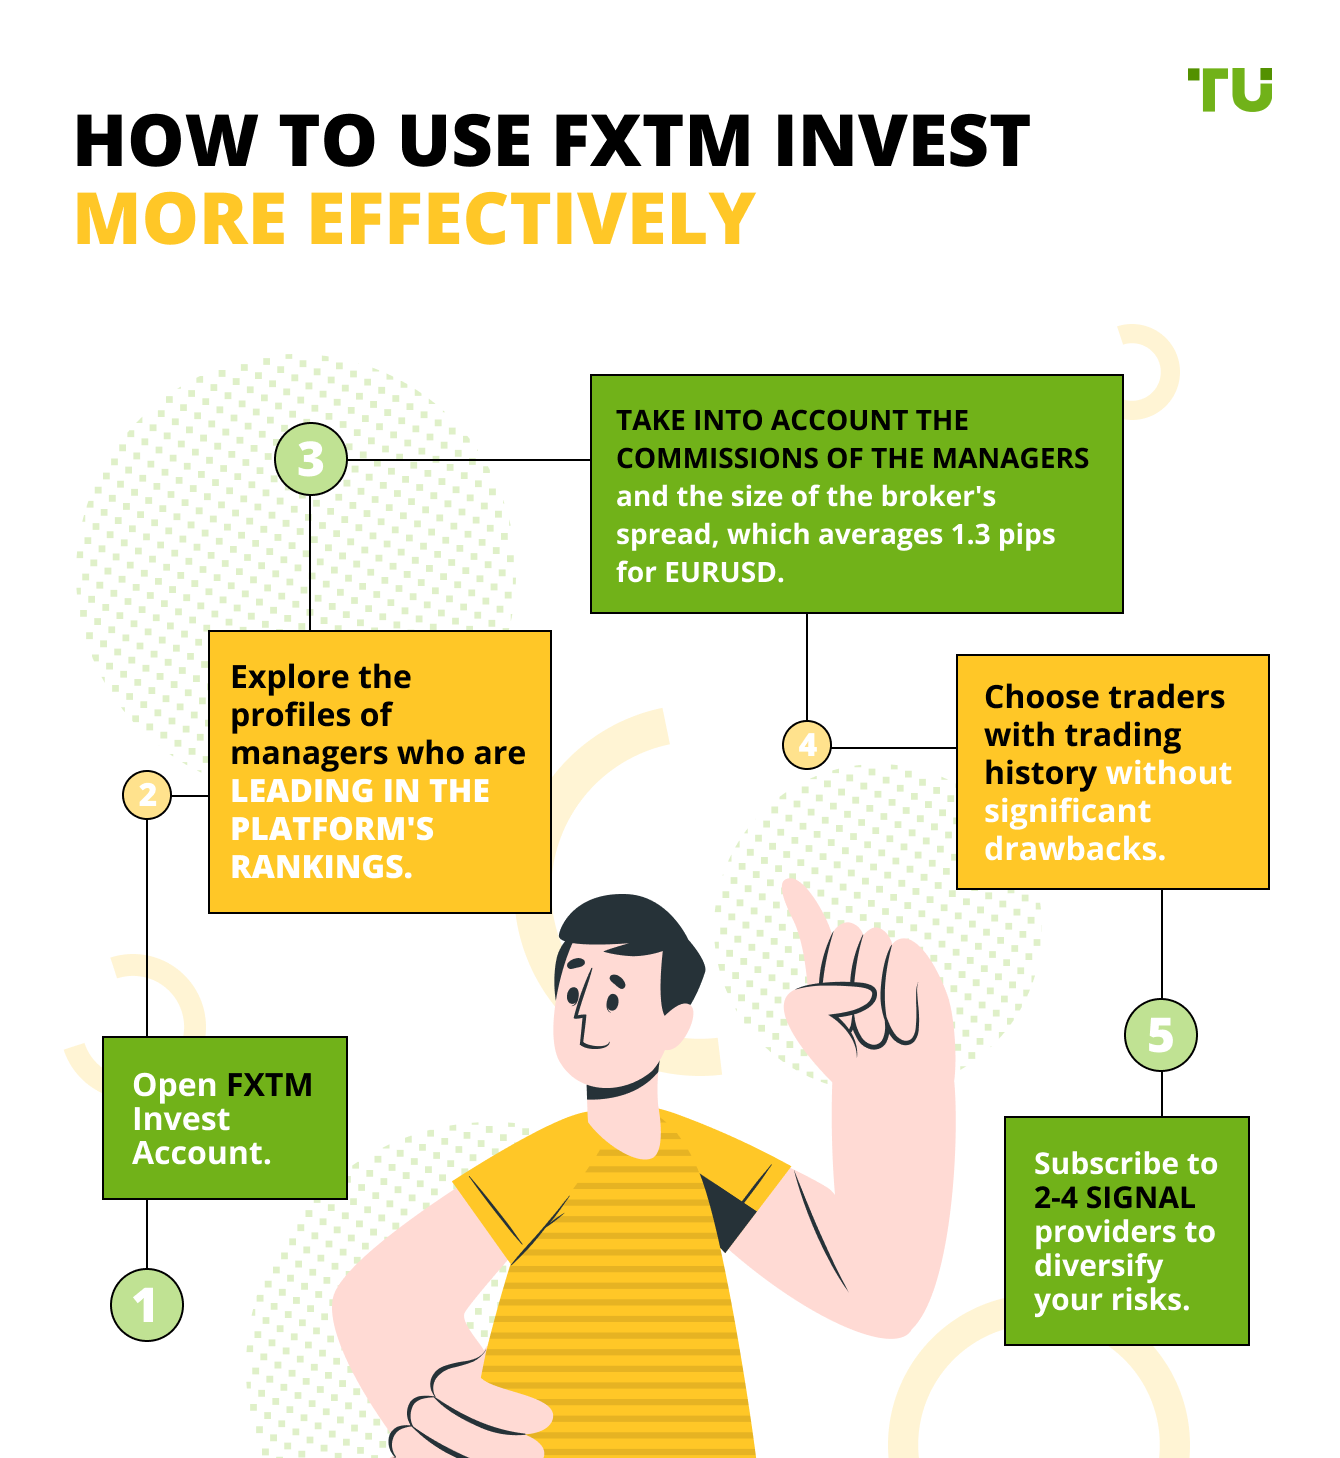 How to Use FXTM Invest More Effectively